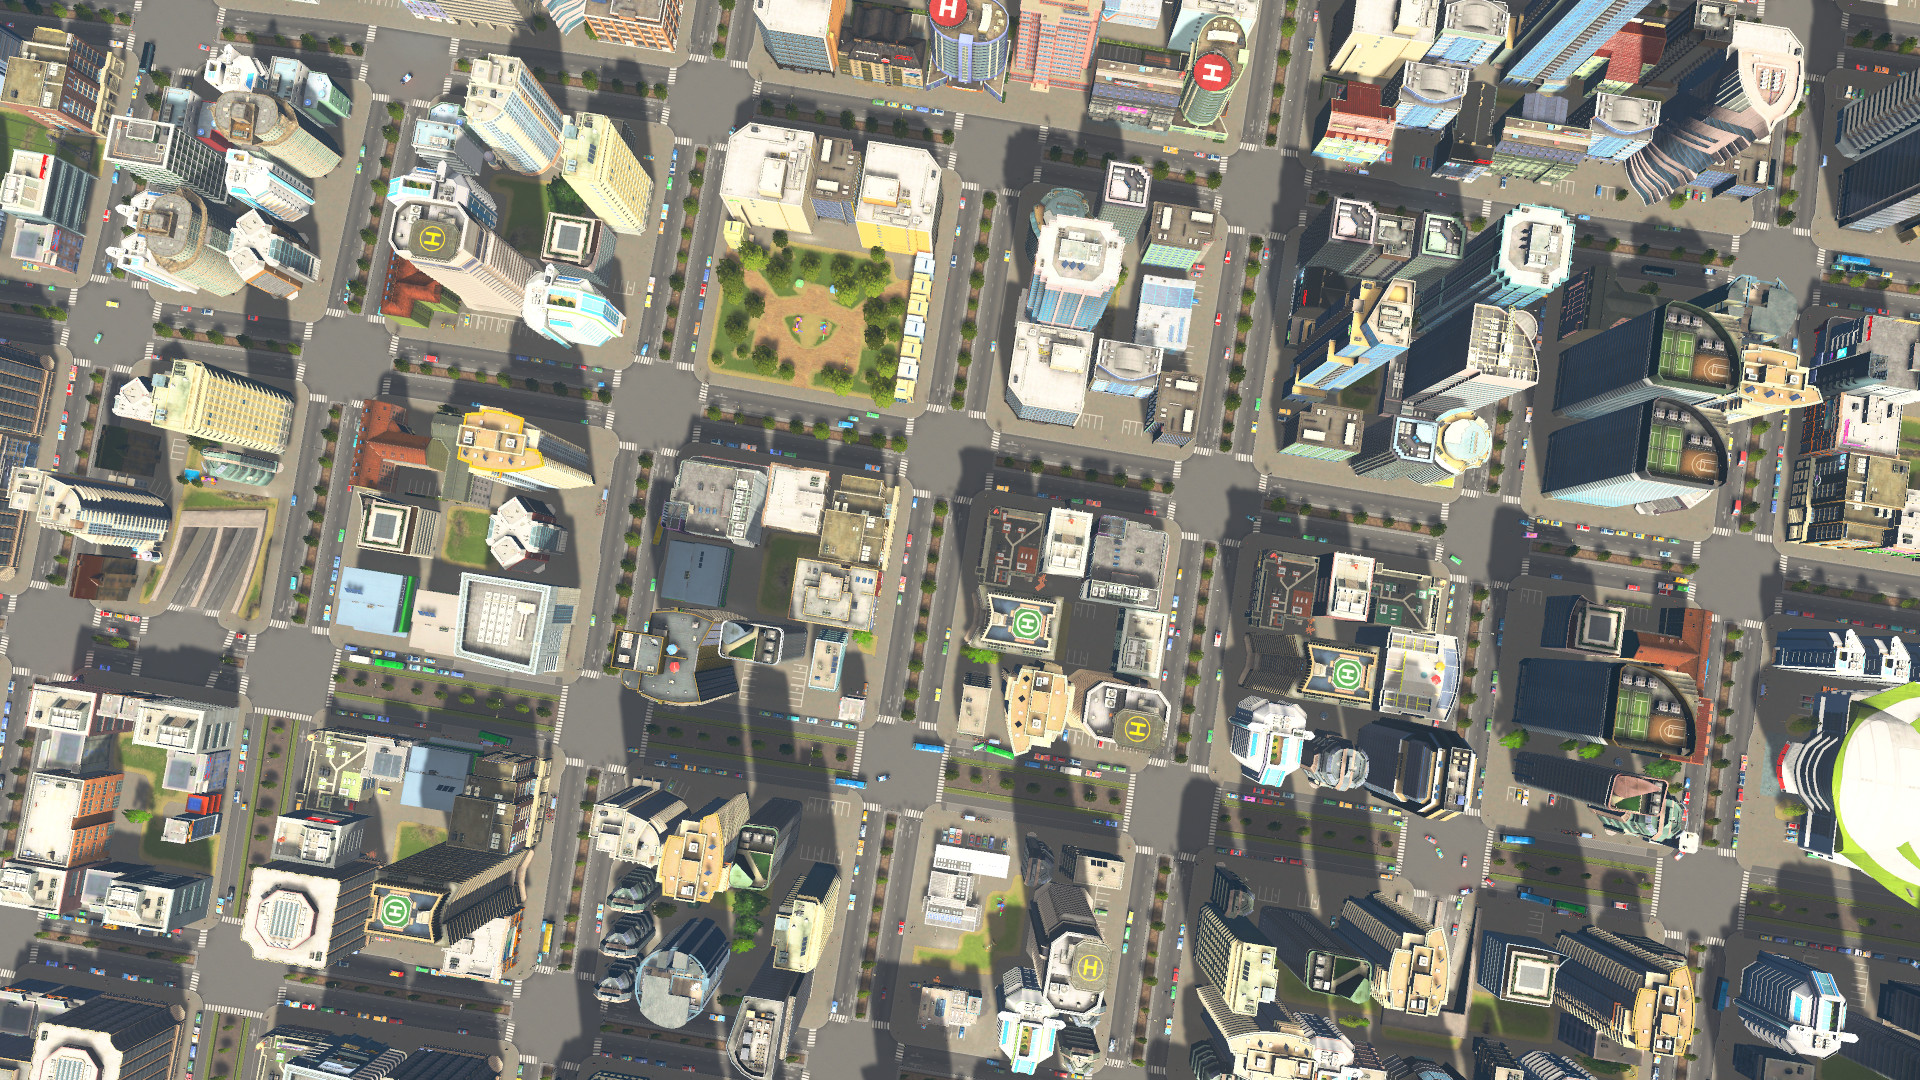 5 Reasons Cities Skylines Is Worth a Look